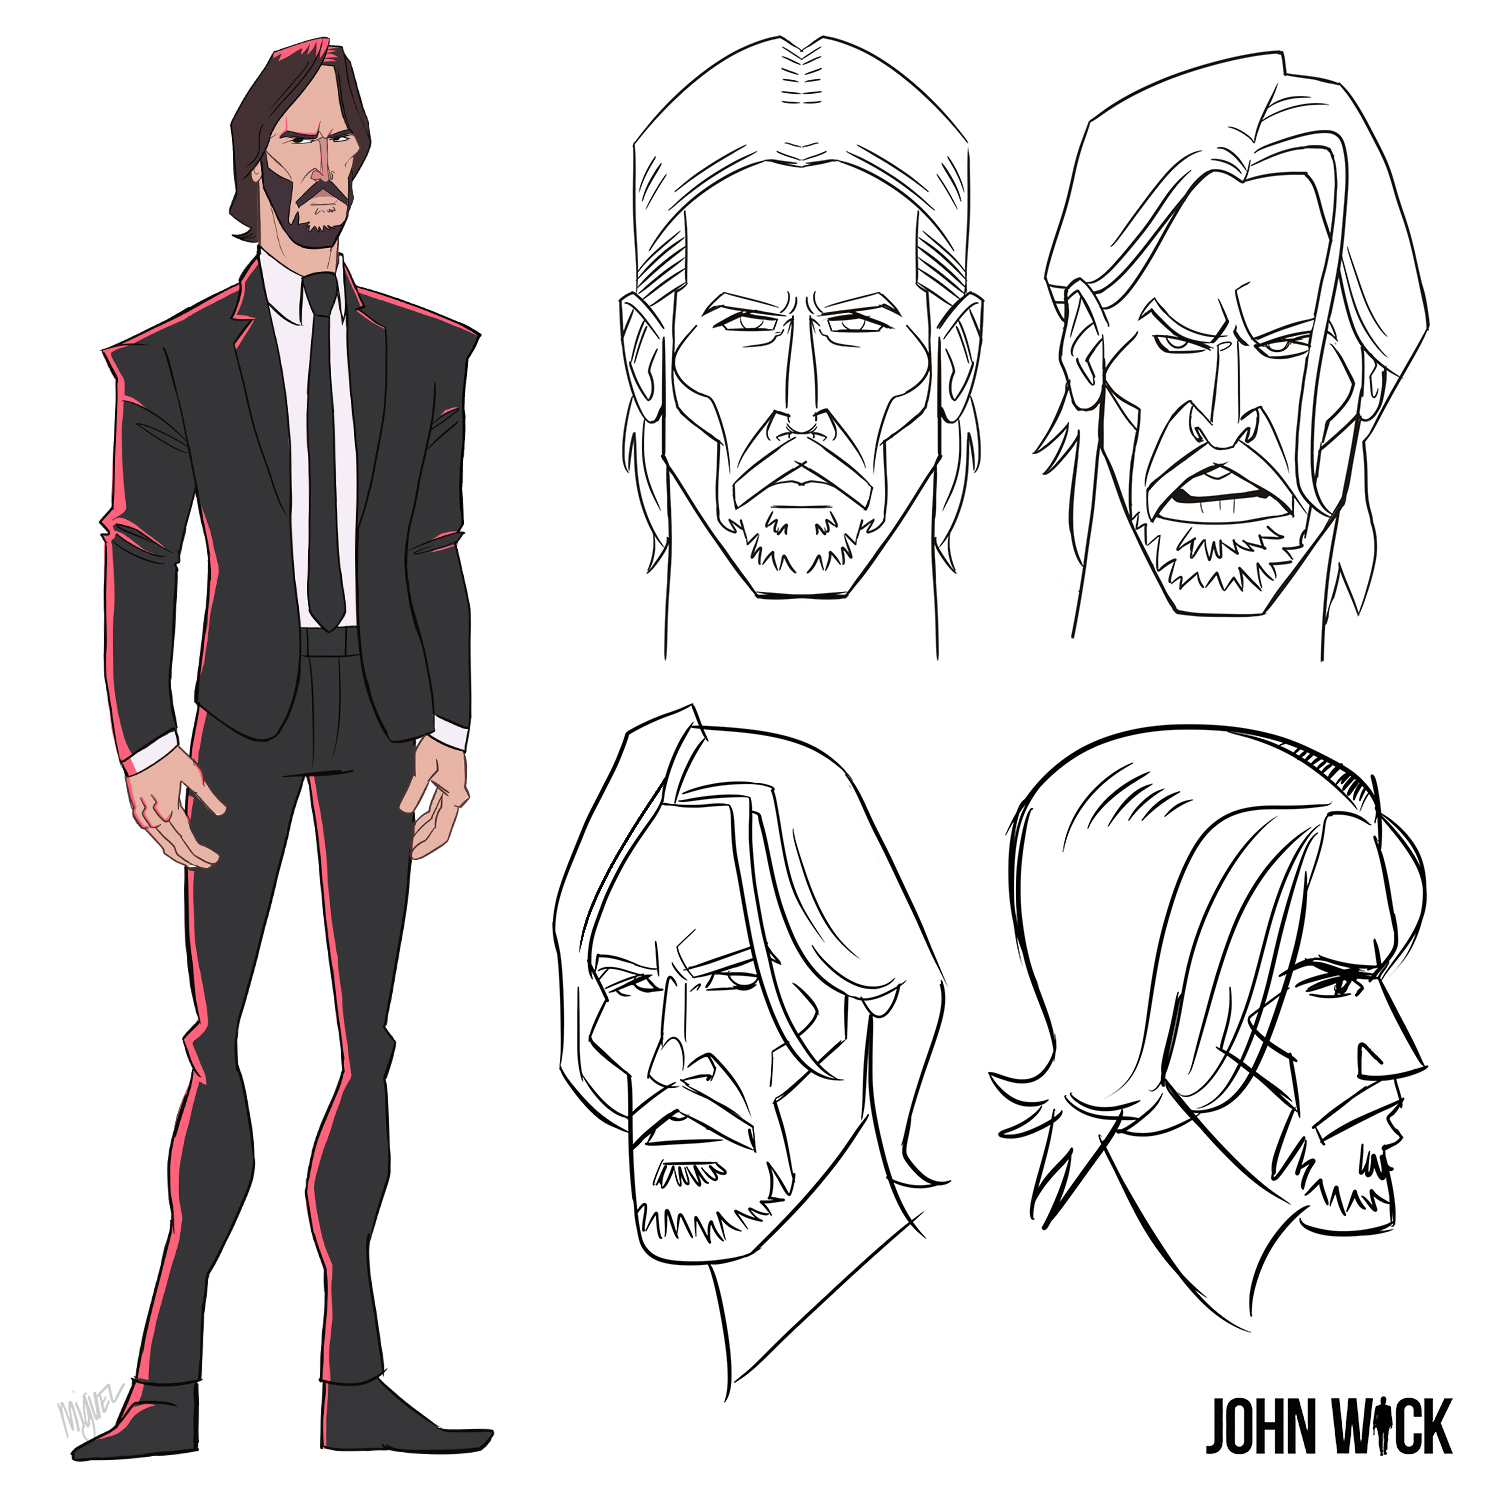 John Wick Poster by ChangeTheThought on Dribbble